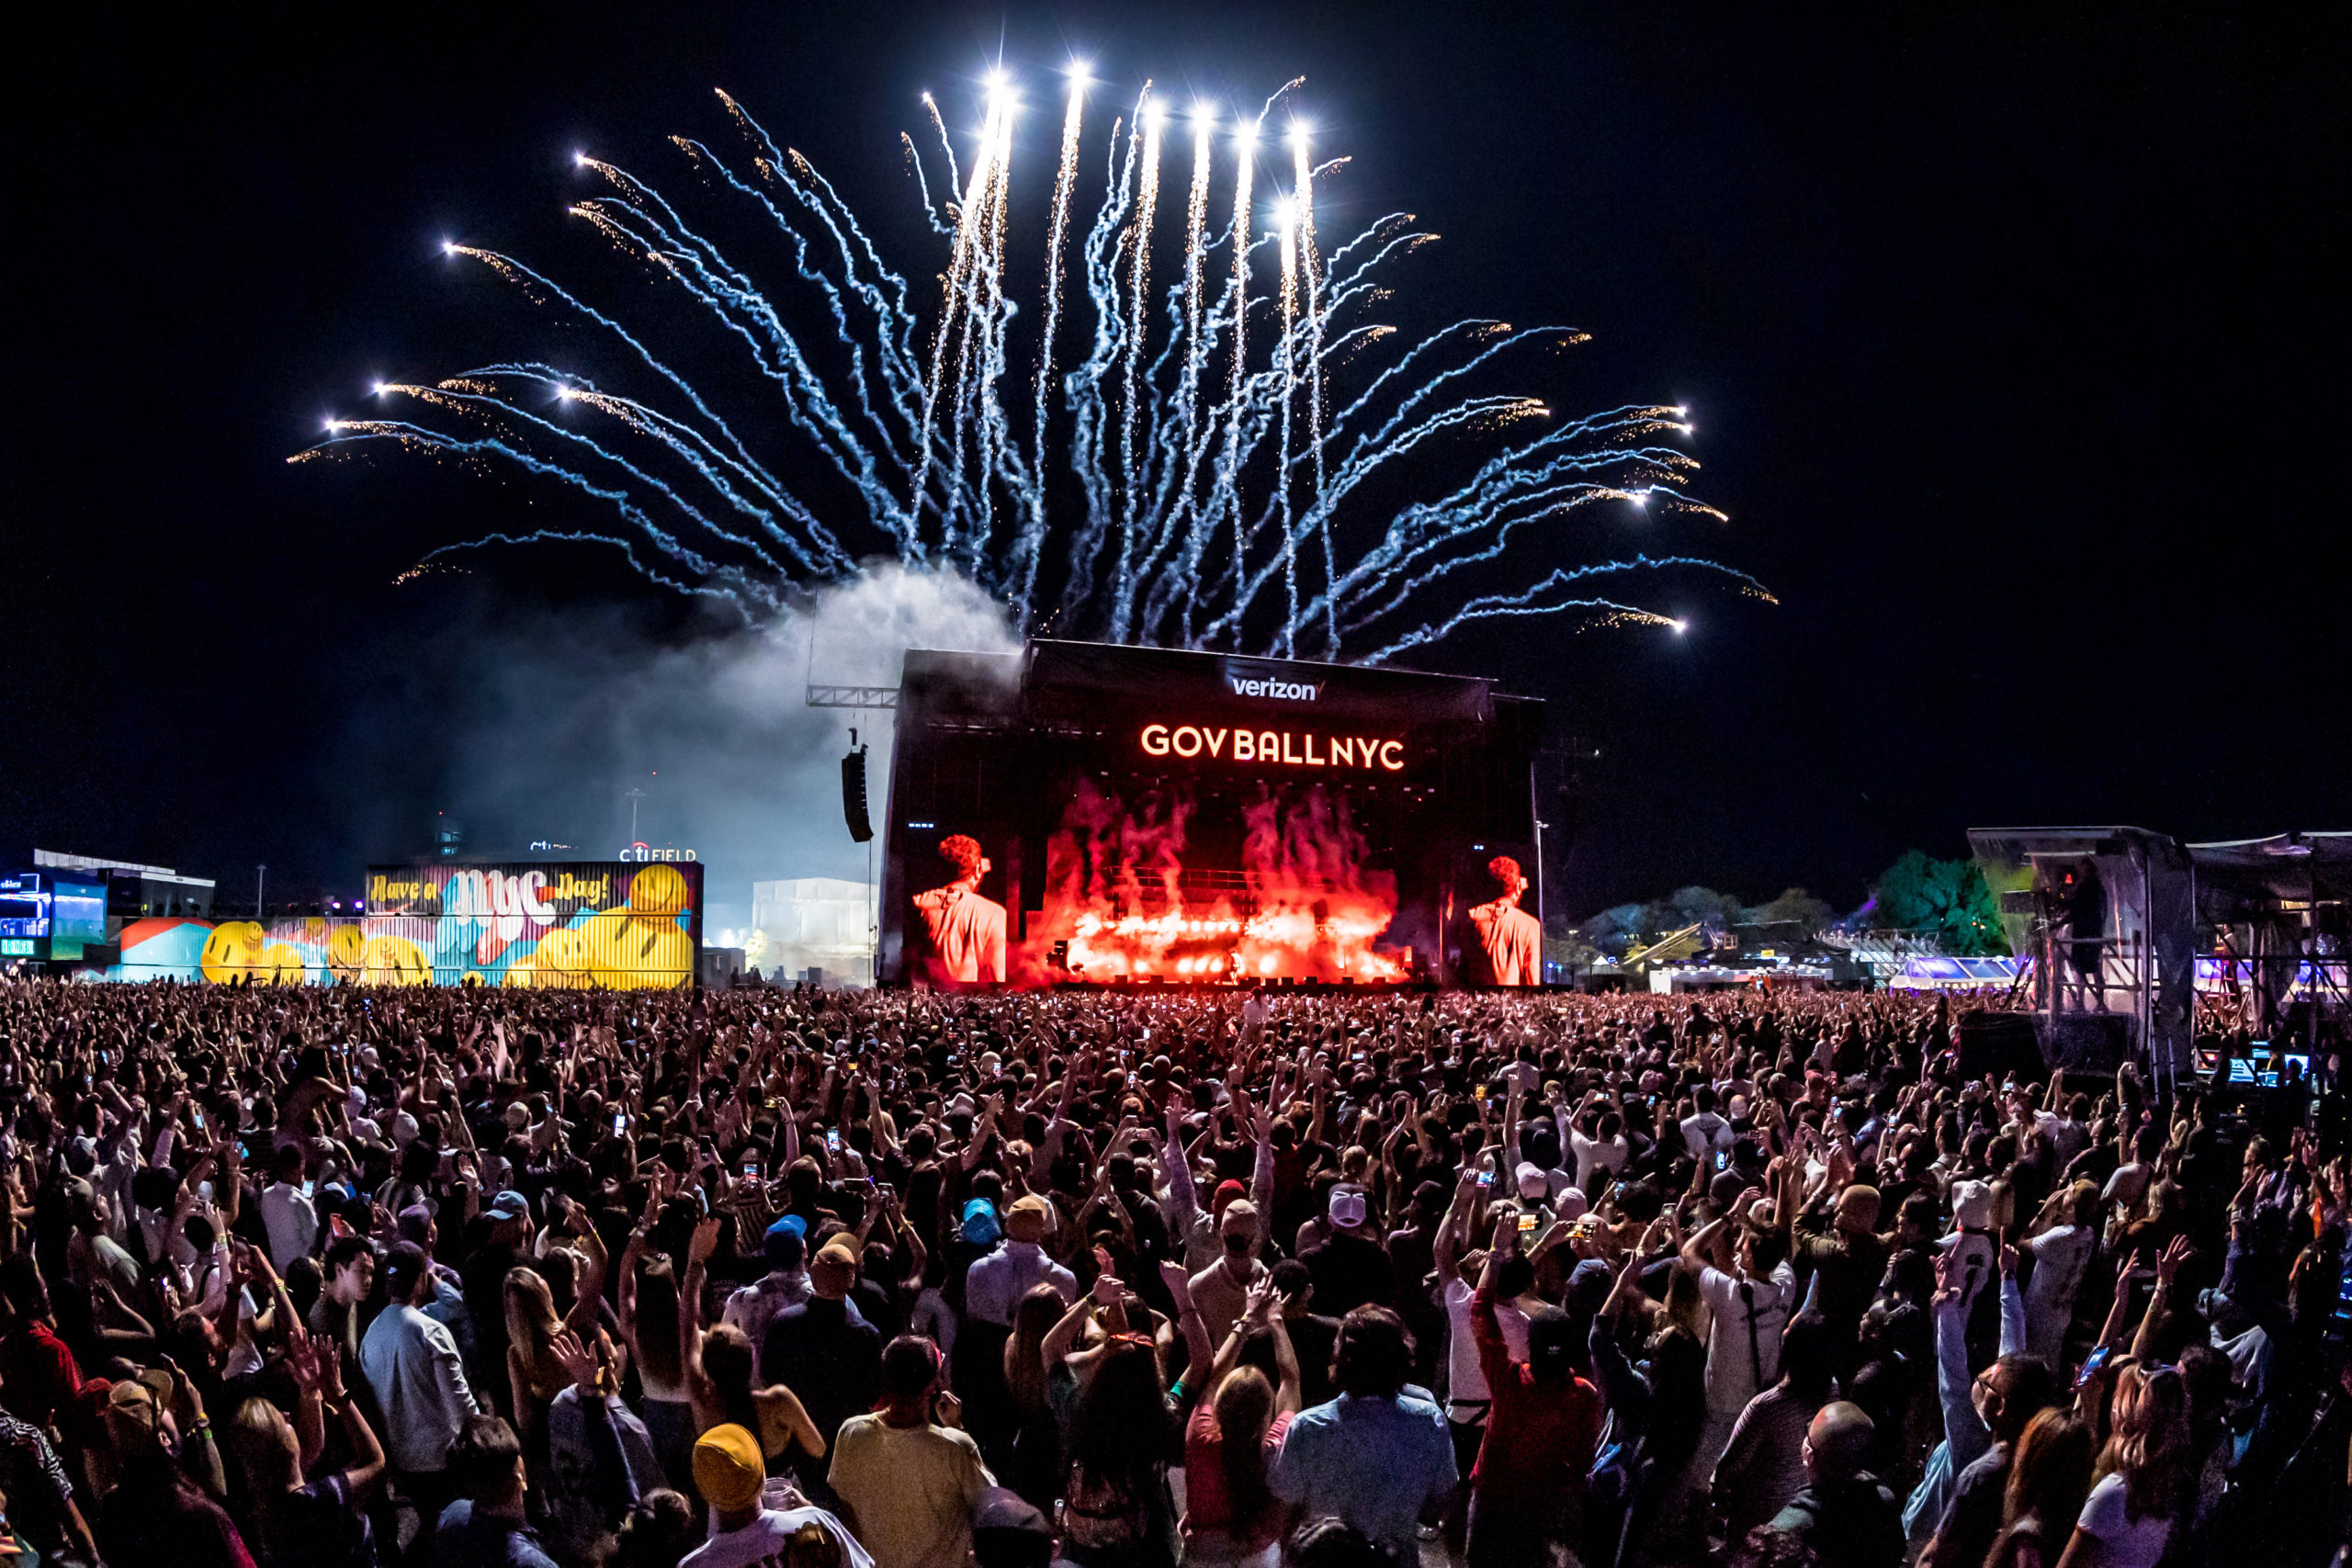 The Governors Ball 2022 Featuring Kid Cudi, Halsey, J. Cole and Many More: Full Lineup and Set Times